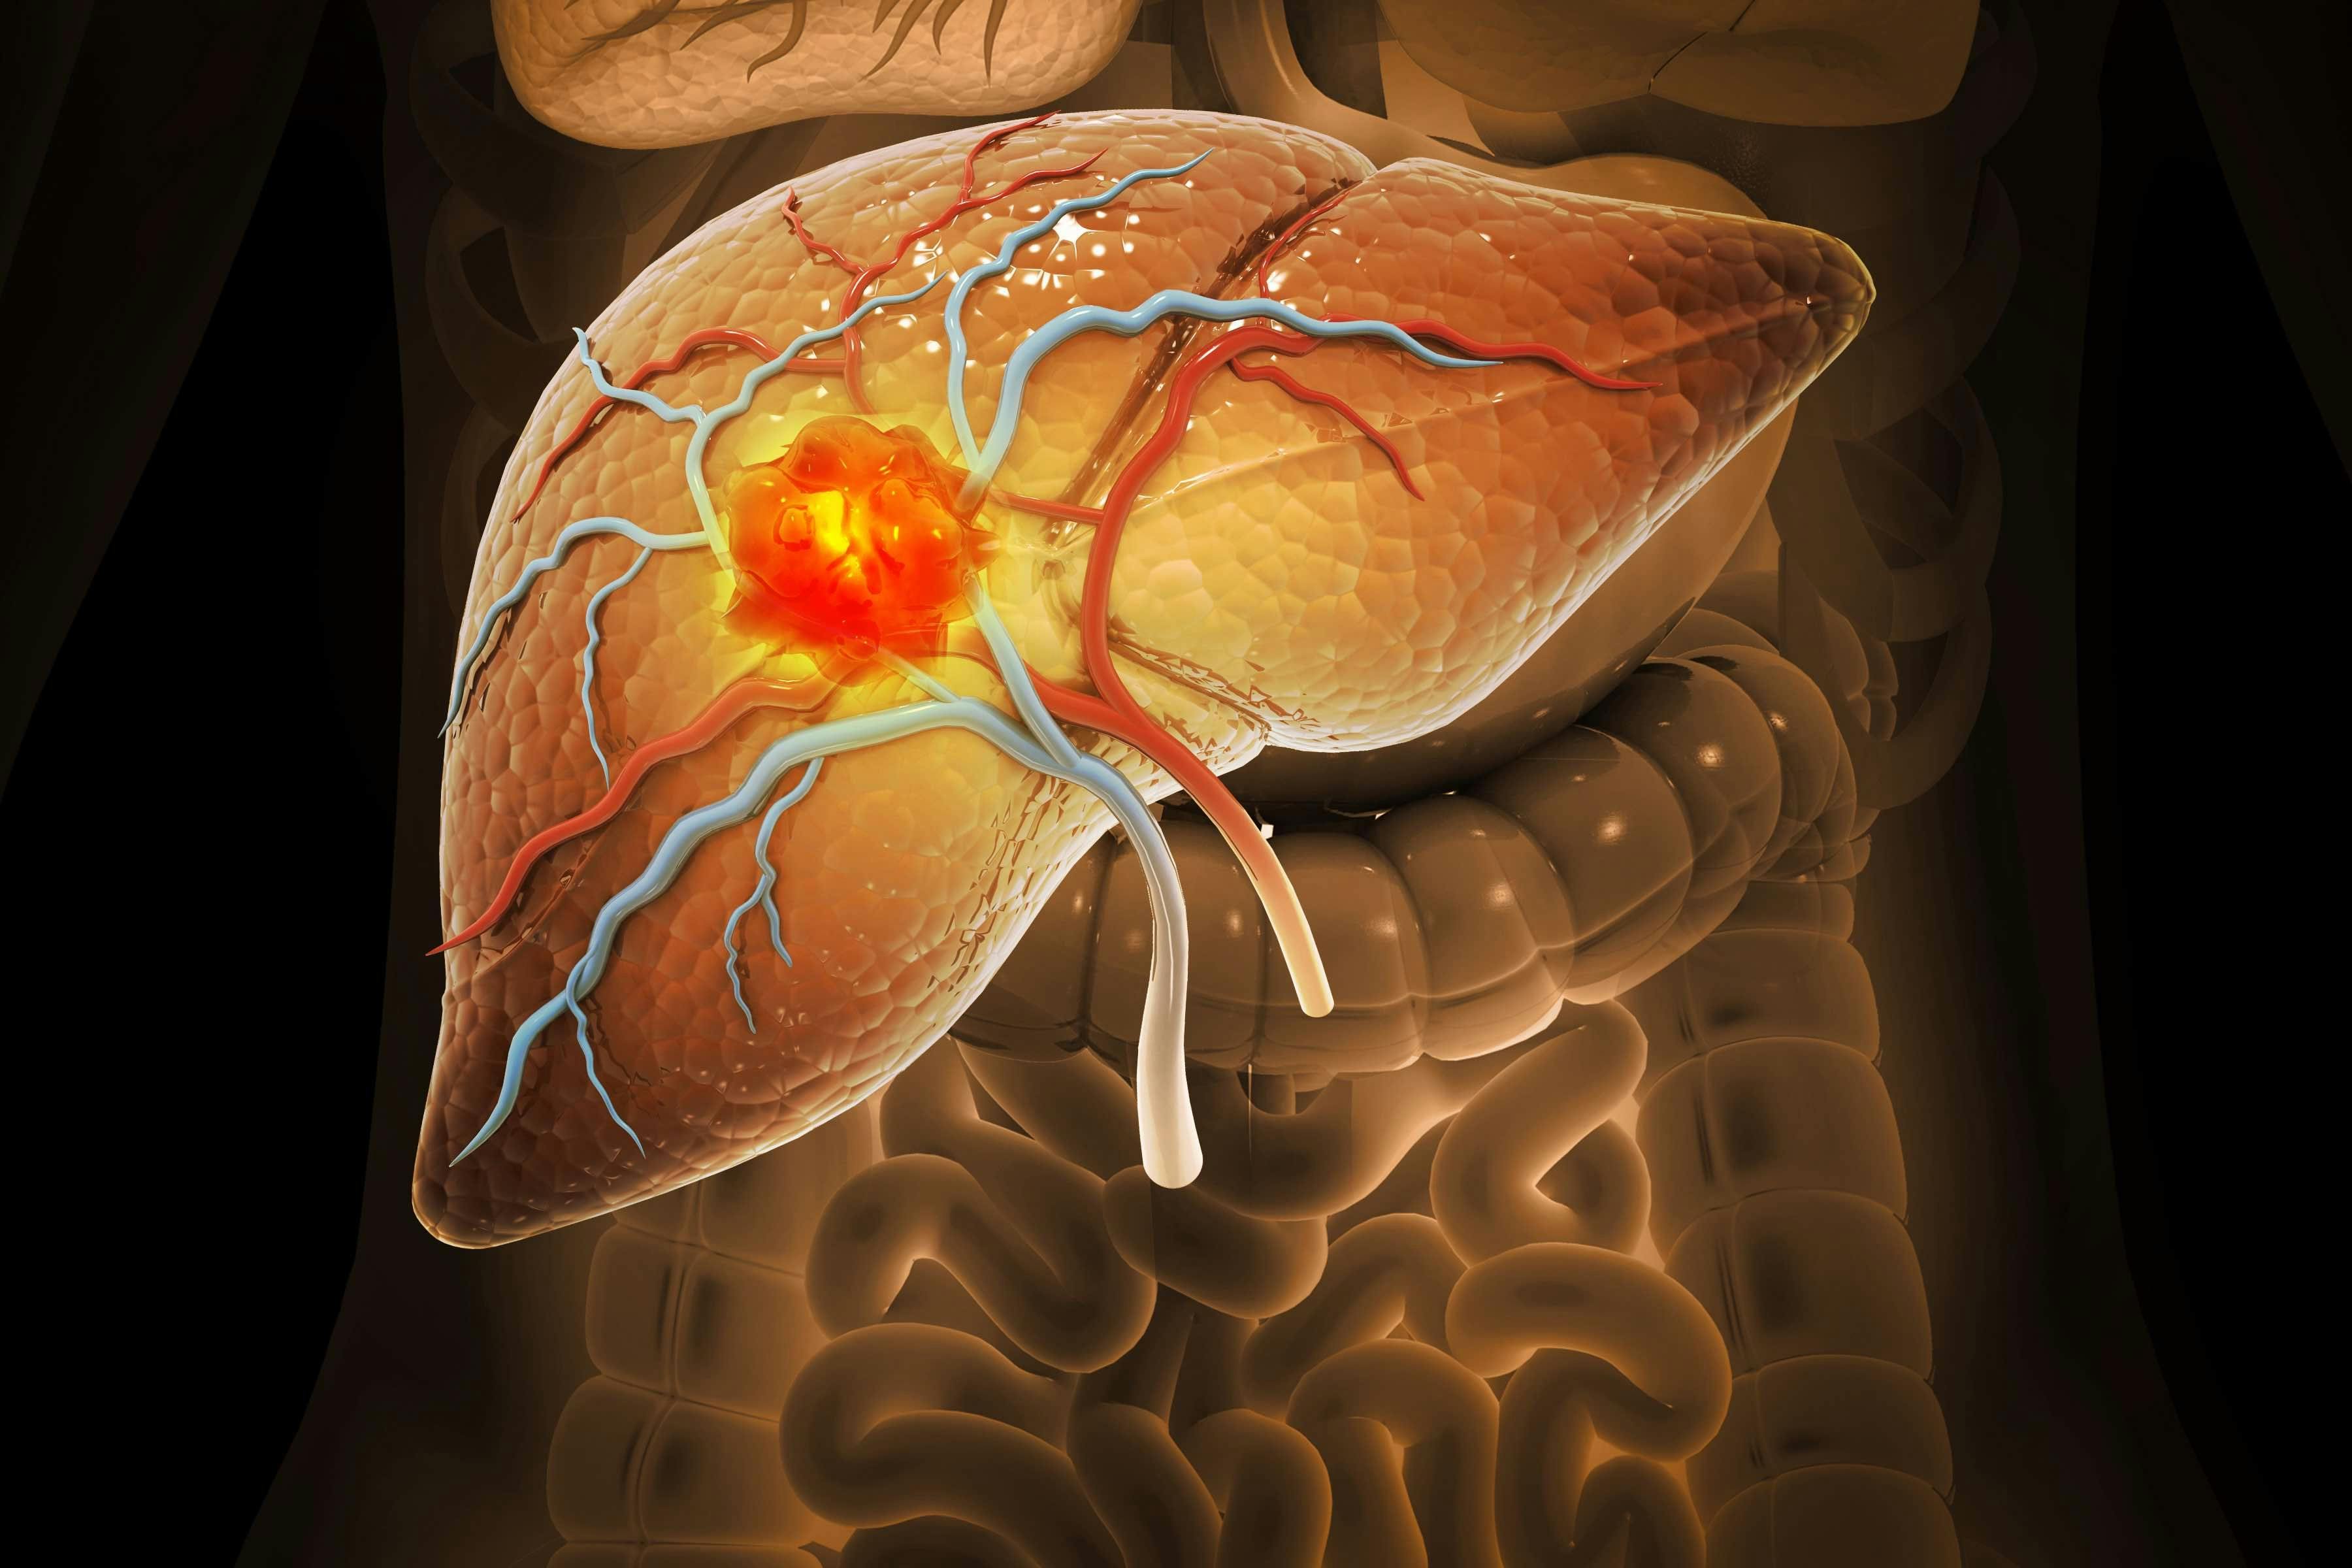 A retrospective study aimed to determine whether adding PD-1 inhibitors to TACE plus lenvatinib improved the prognosis of patients with unresectable hepatocellular carcinoma. | Image credit: Crystal light - stock.adobe.com